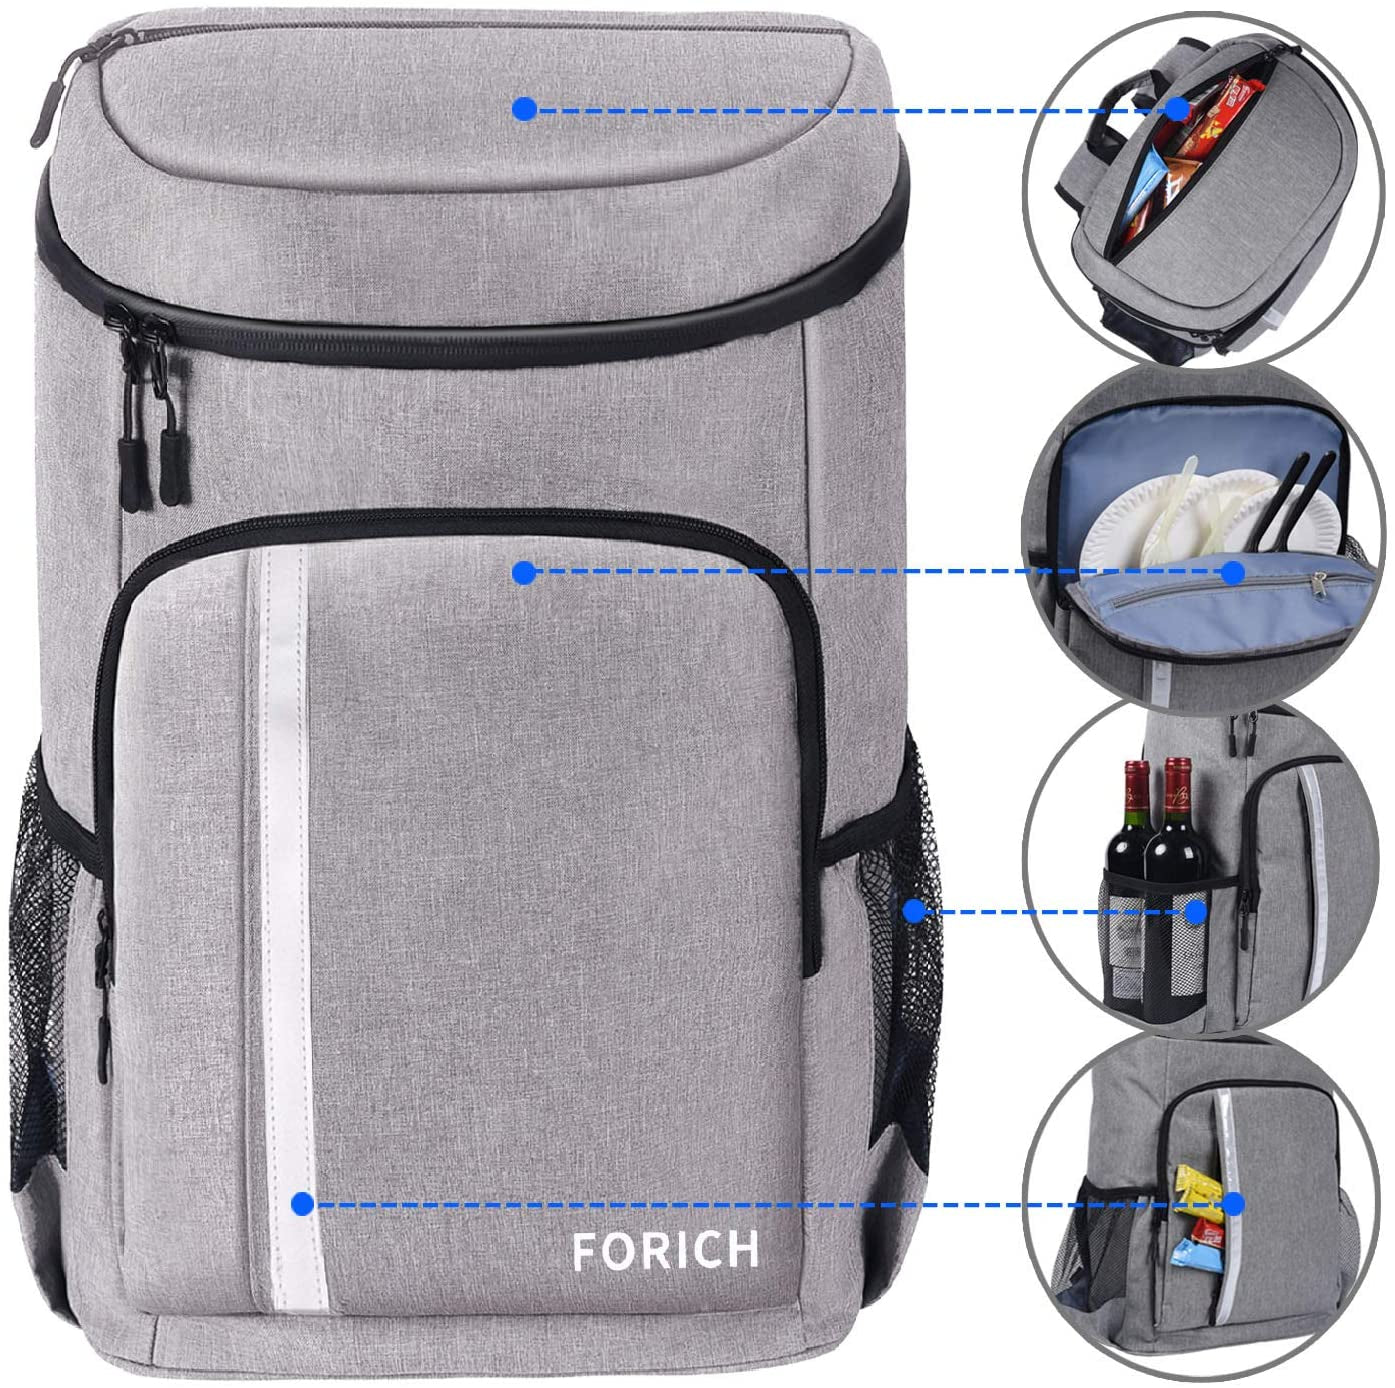 Insulated Leakproof Backpack Cooler Bag for Men and Women - 30 Can Capacity